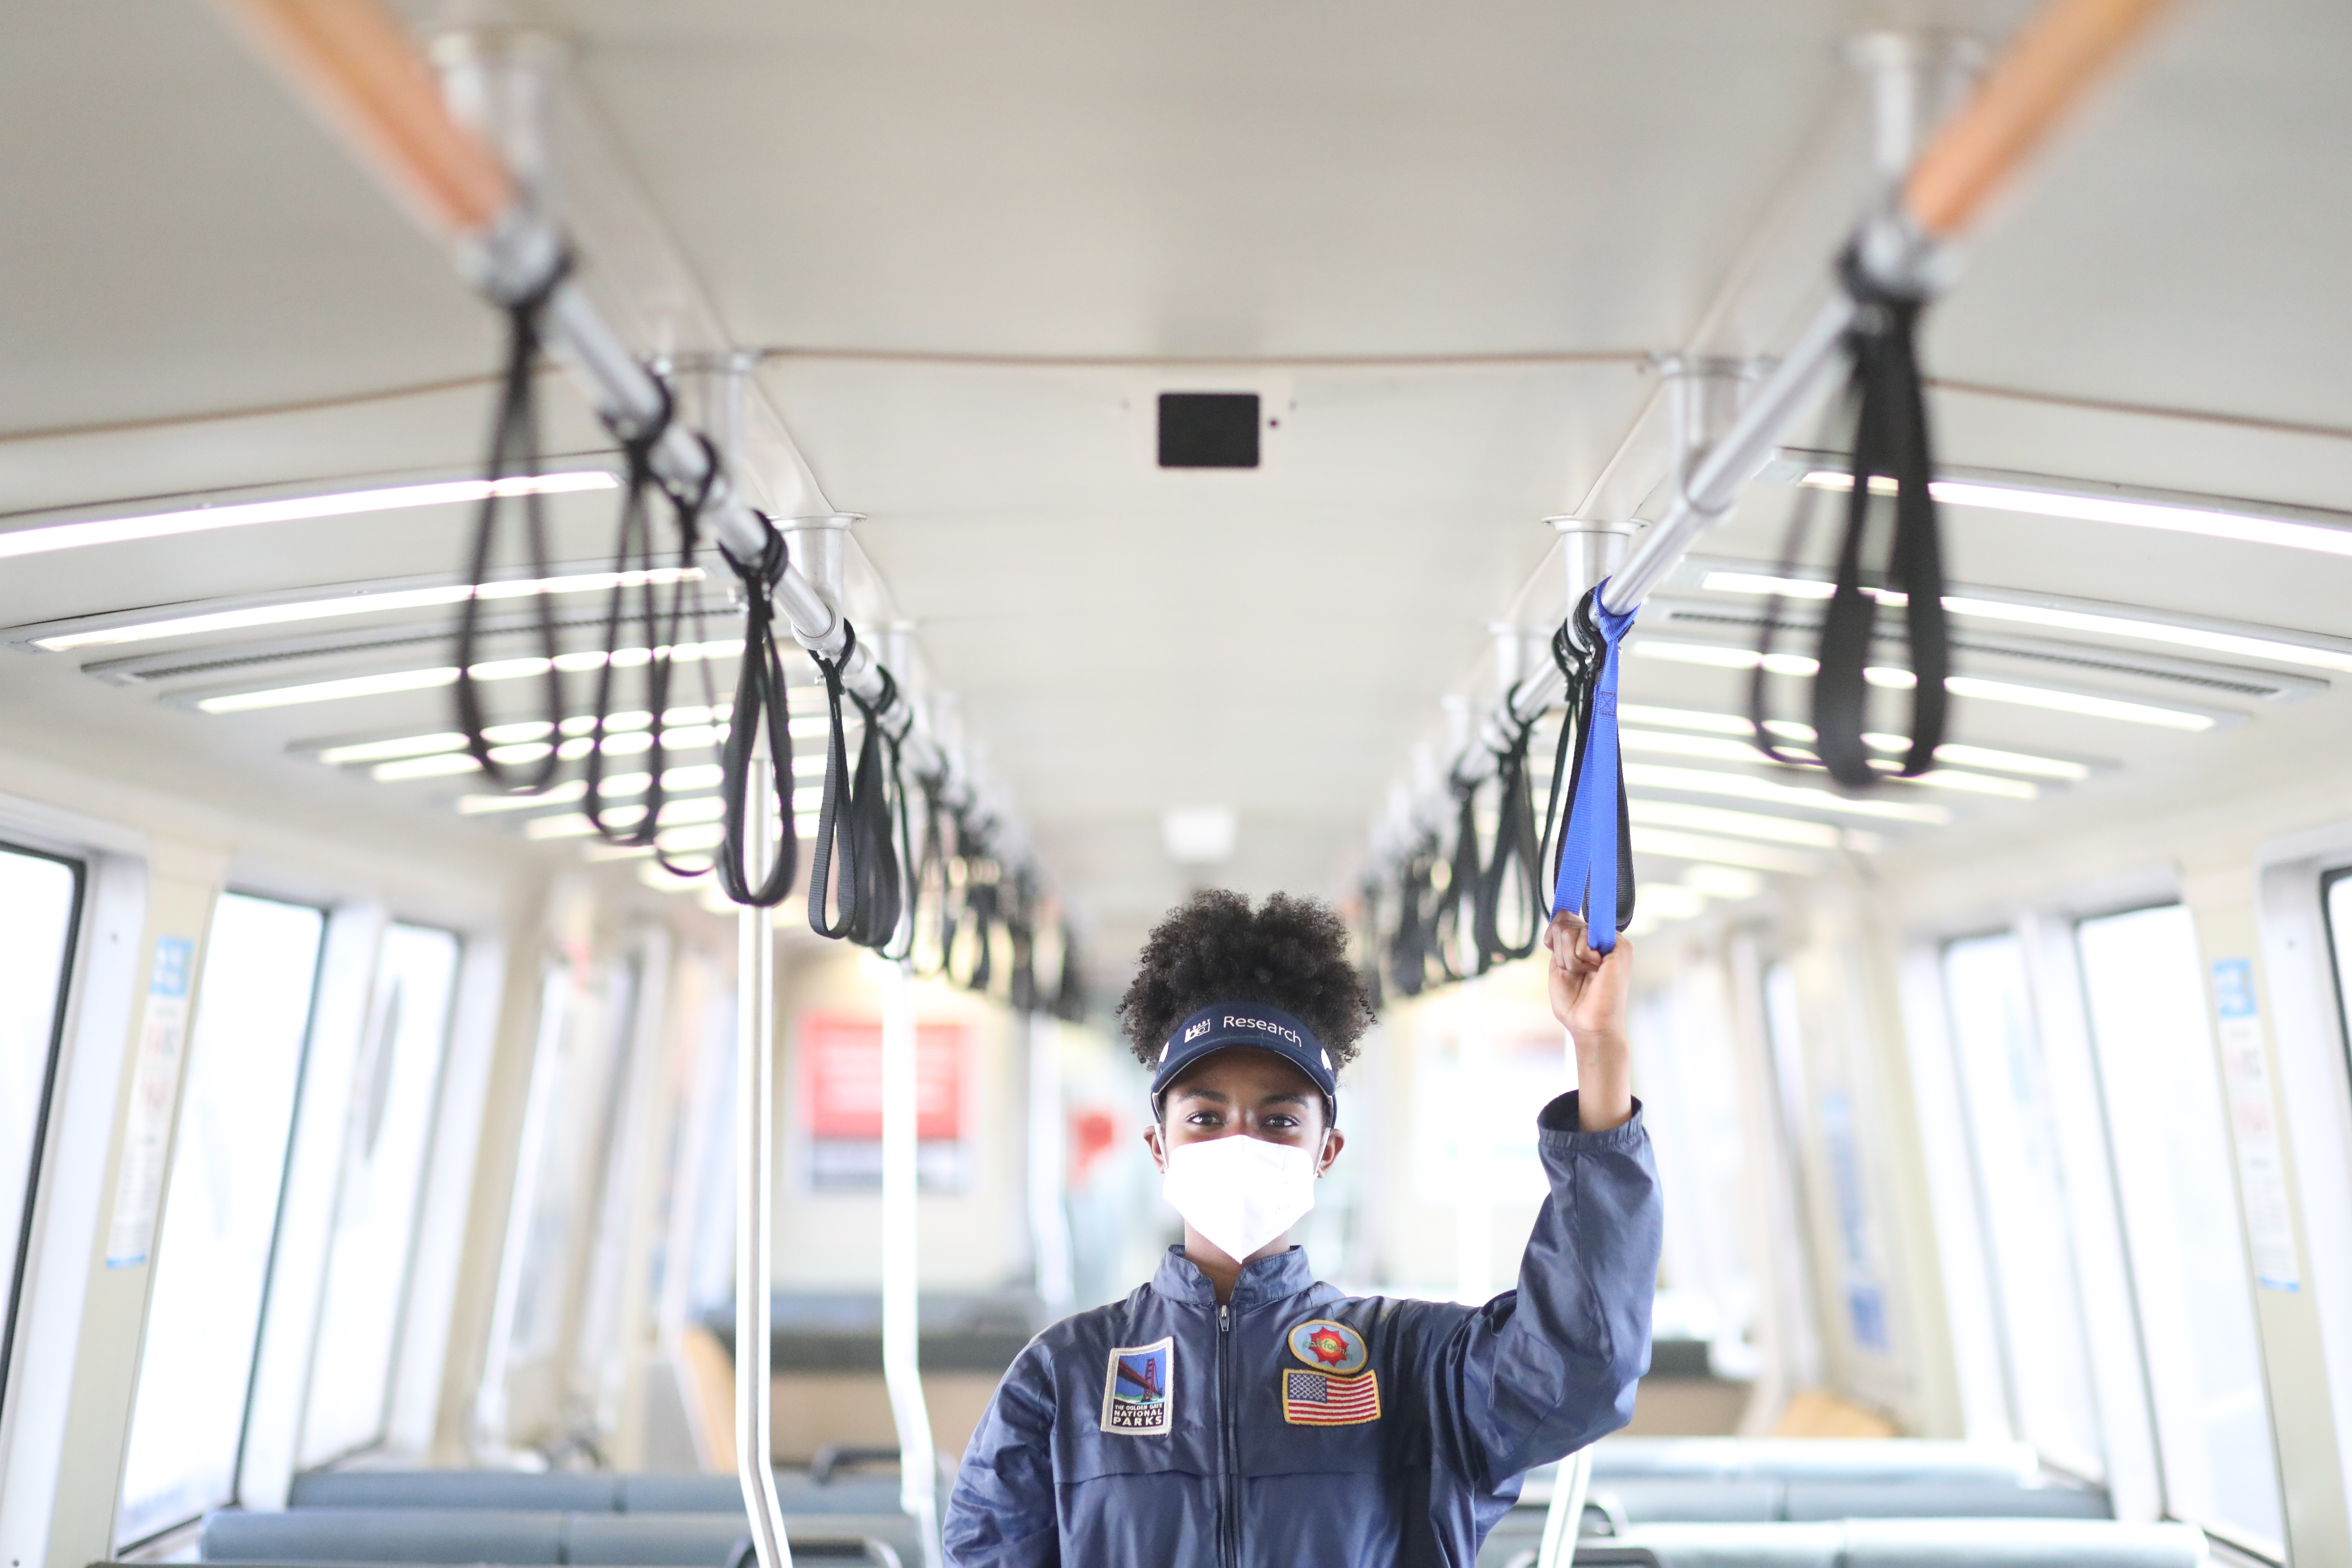 BART staff using a personal hand strap